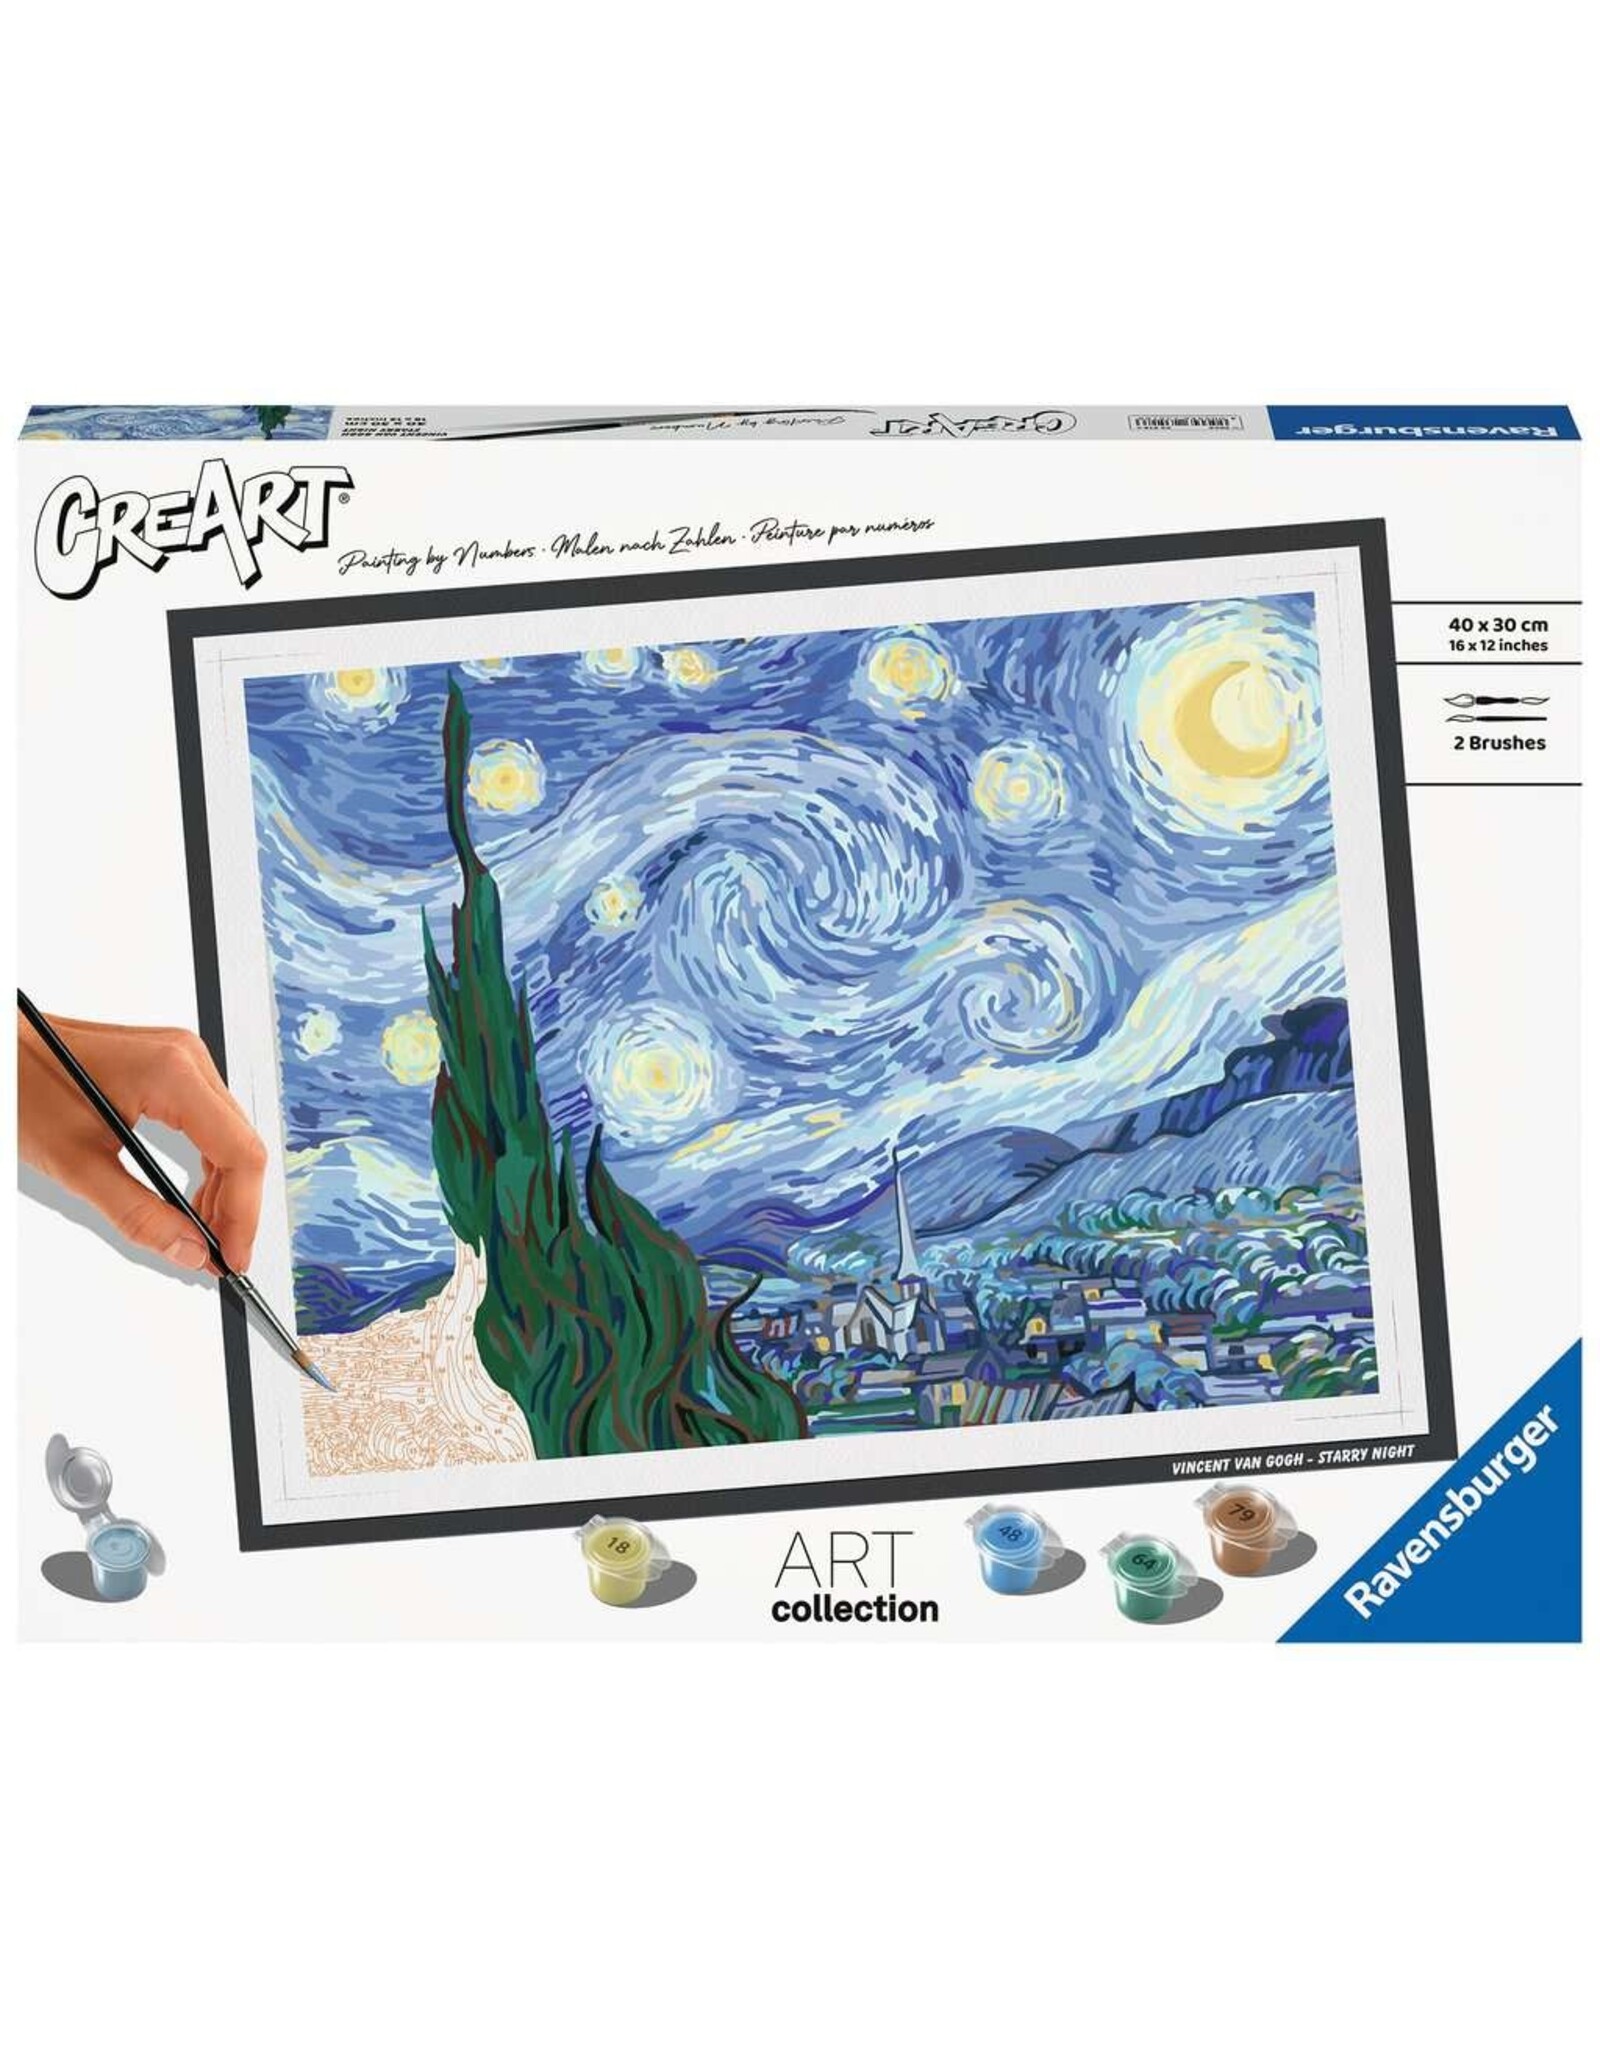 Ravensburger CreArt Paint by Number - Van Gogh: The Starry Night